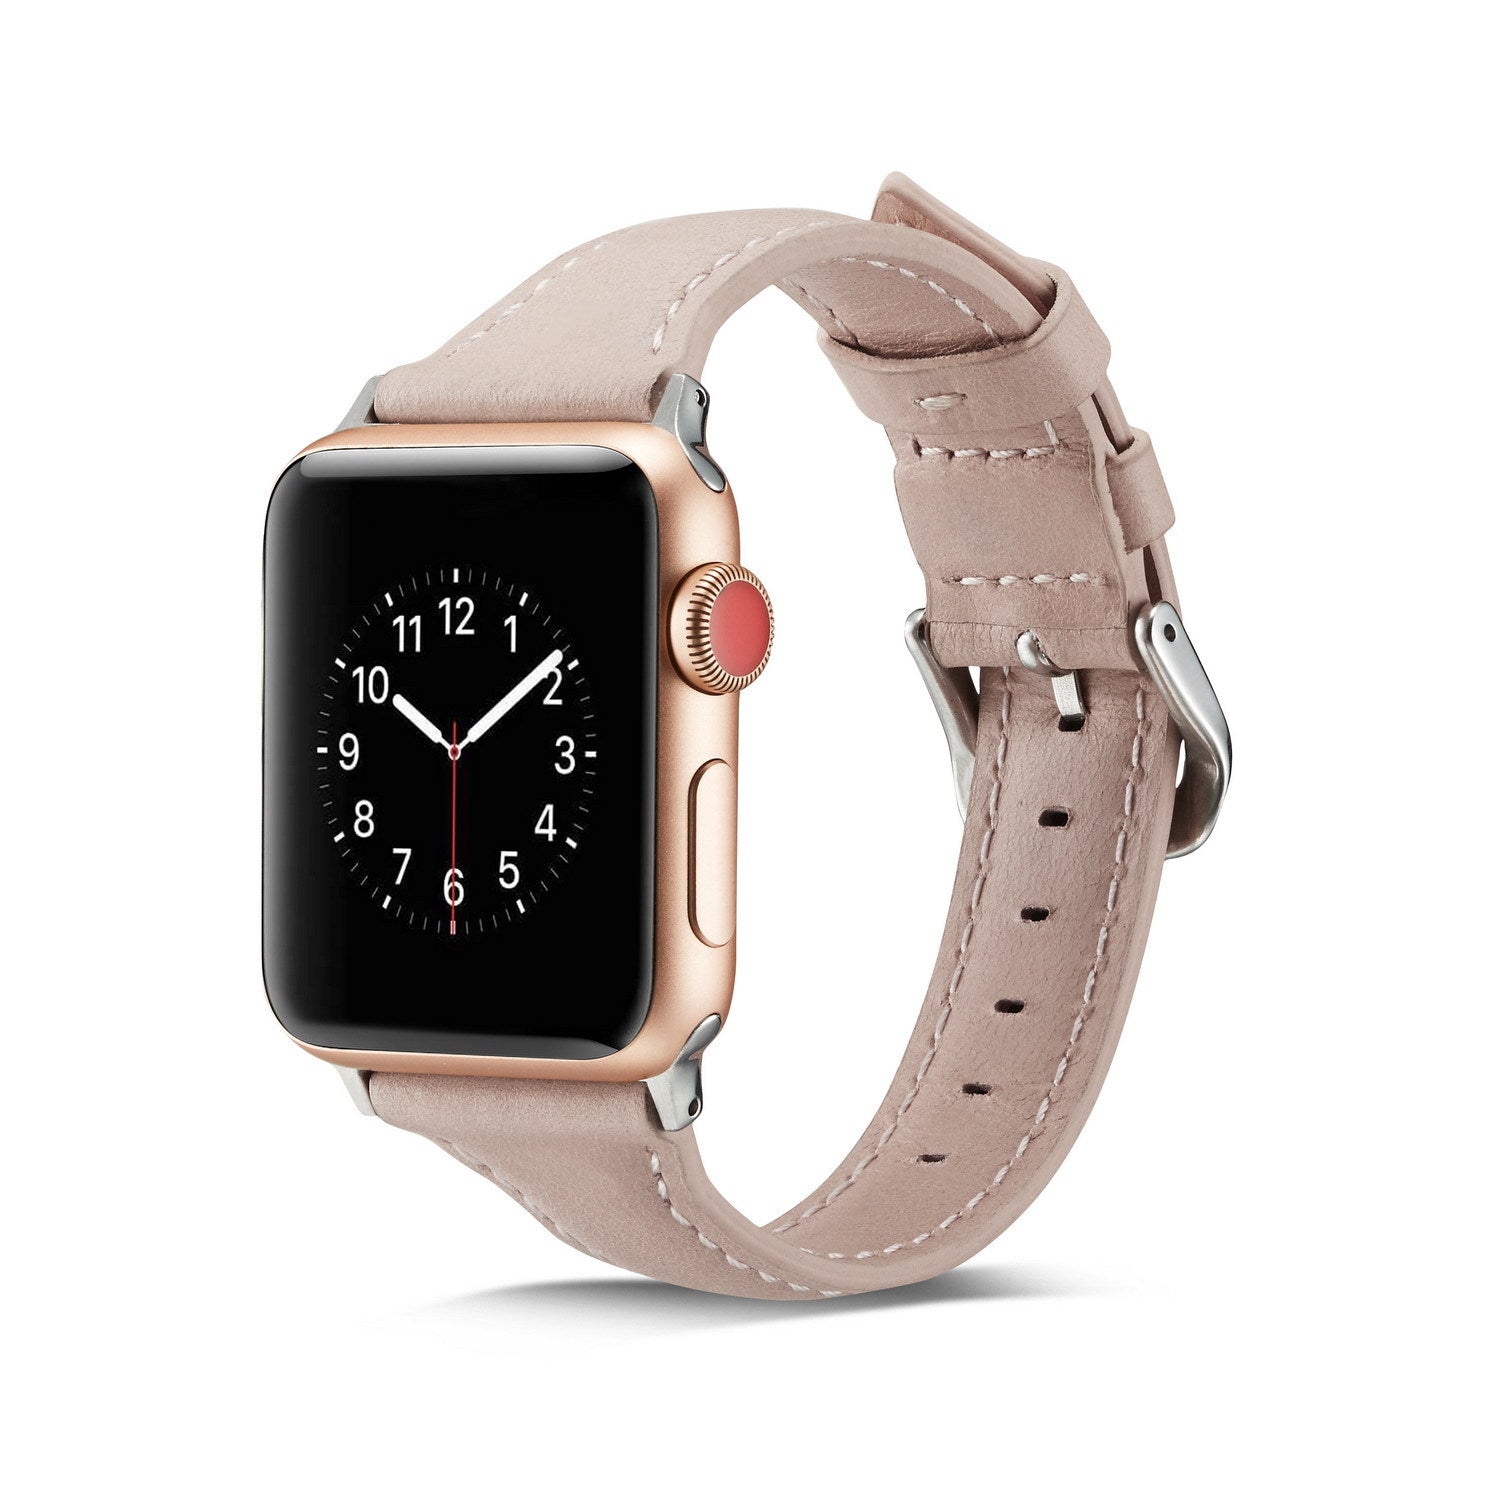 Apple Watch Strap Leather Buckle T-Slimming Strap Gifts